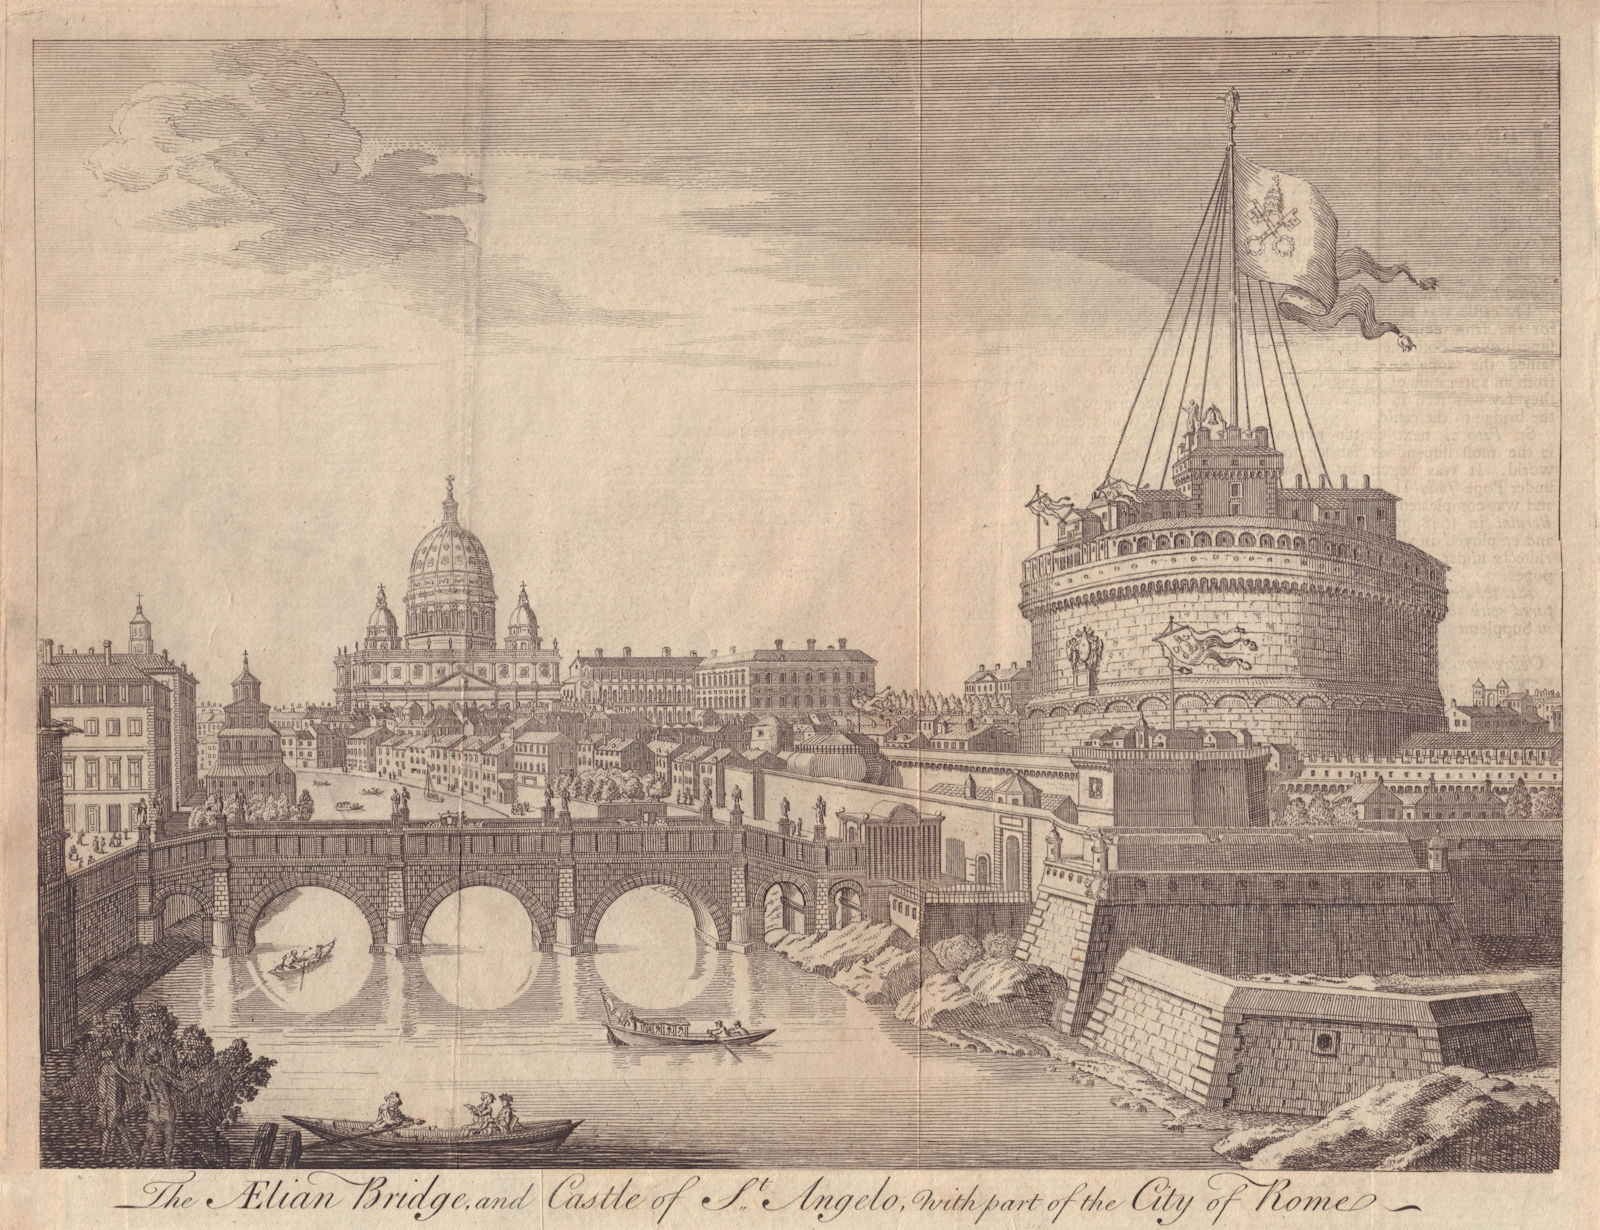 The Aelian Bridge and Castle of St. Angelo, with part of the City of Rome 1752